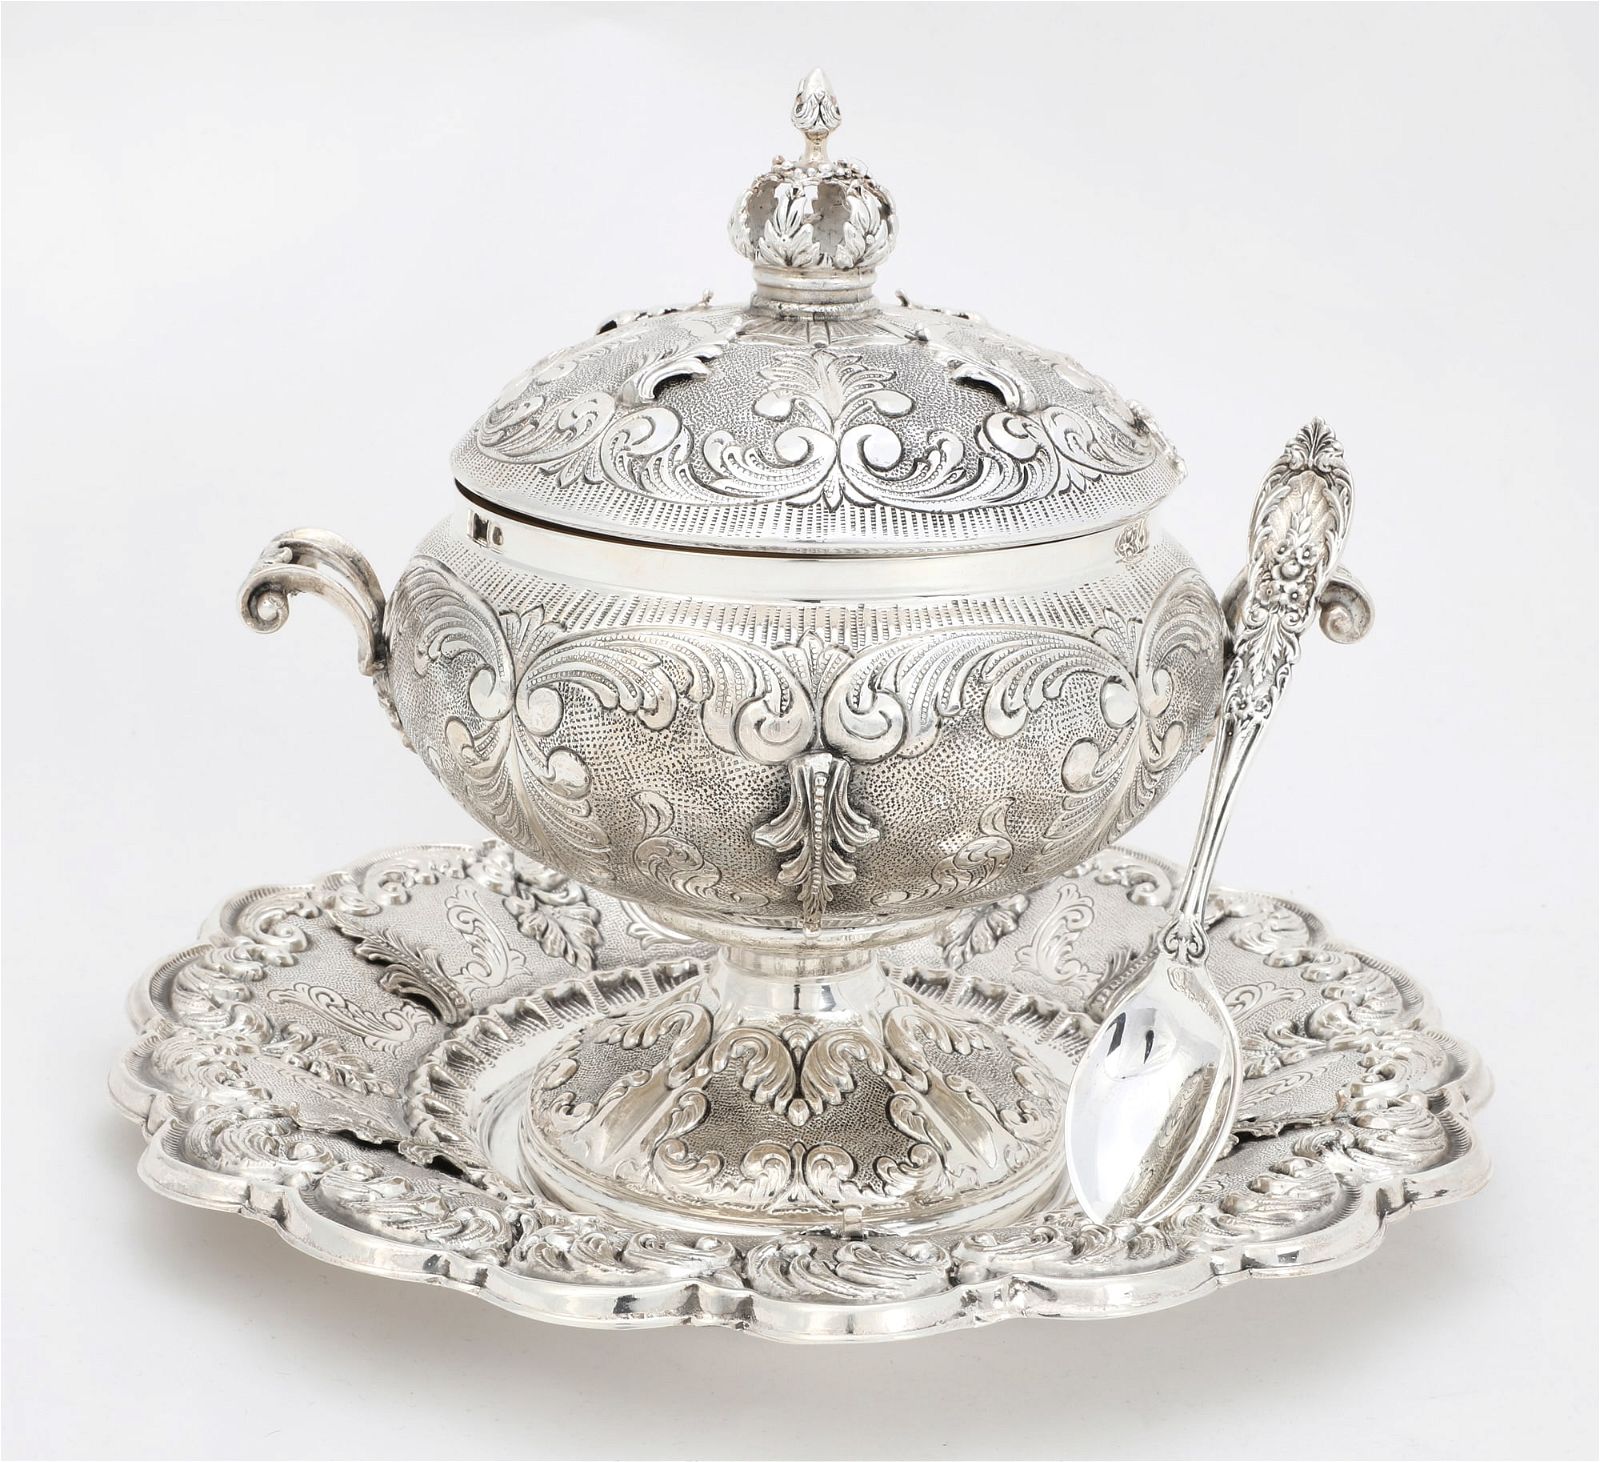 A TURKISH BAROQUE STYLE SILVER